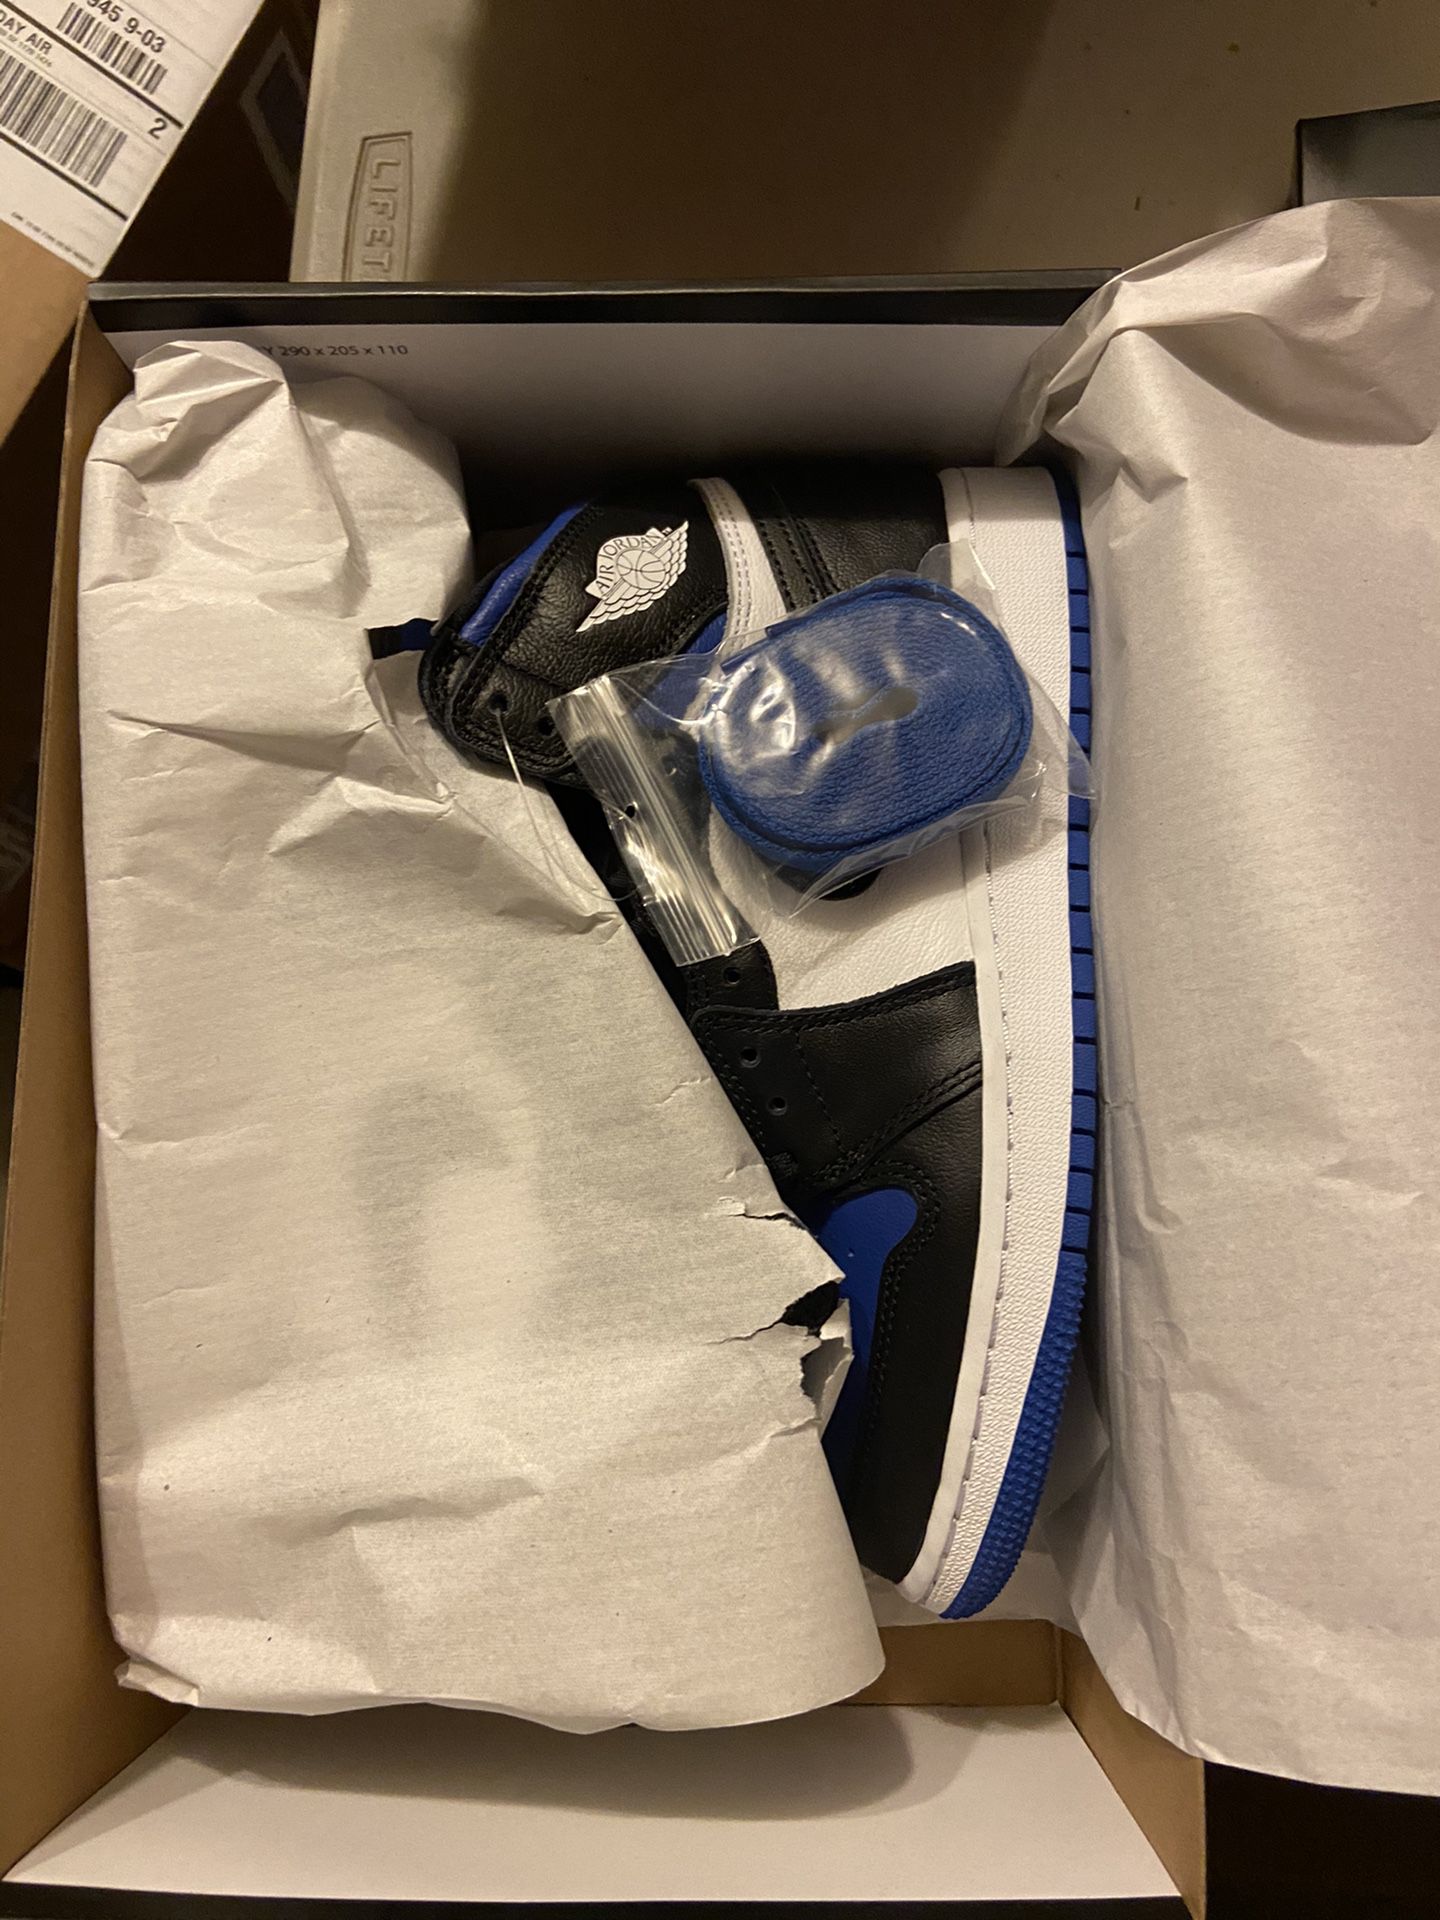 Brand new air Jordan 1 royal gs size 5.5 (on hold for someone, will be live again if he miss tomorrow)